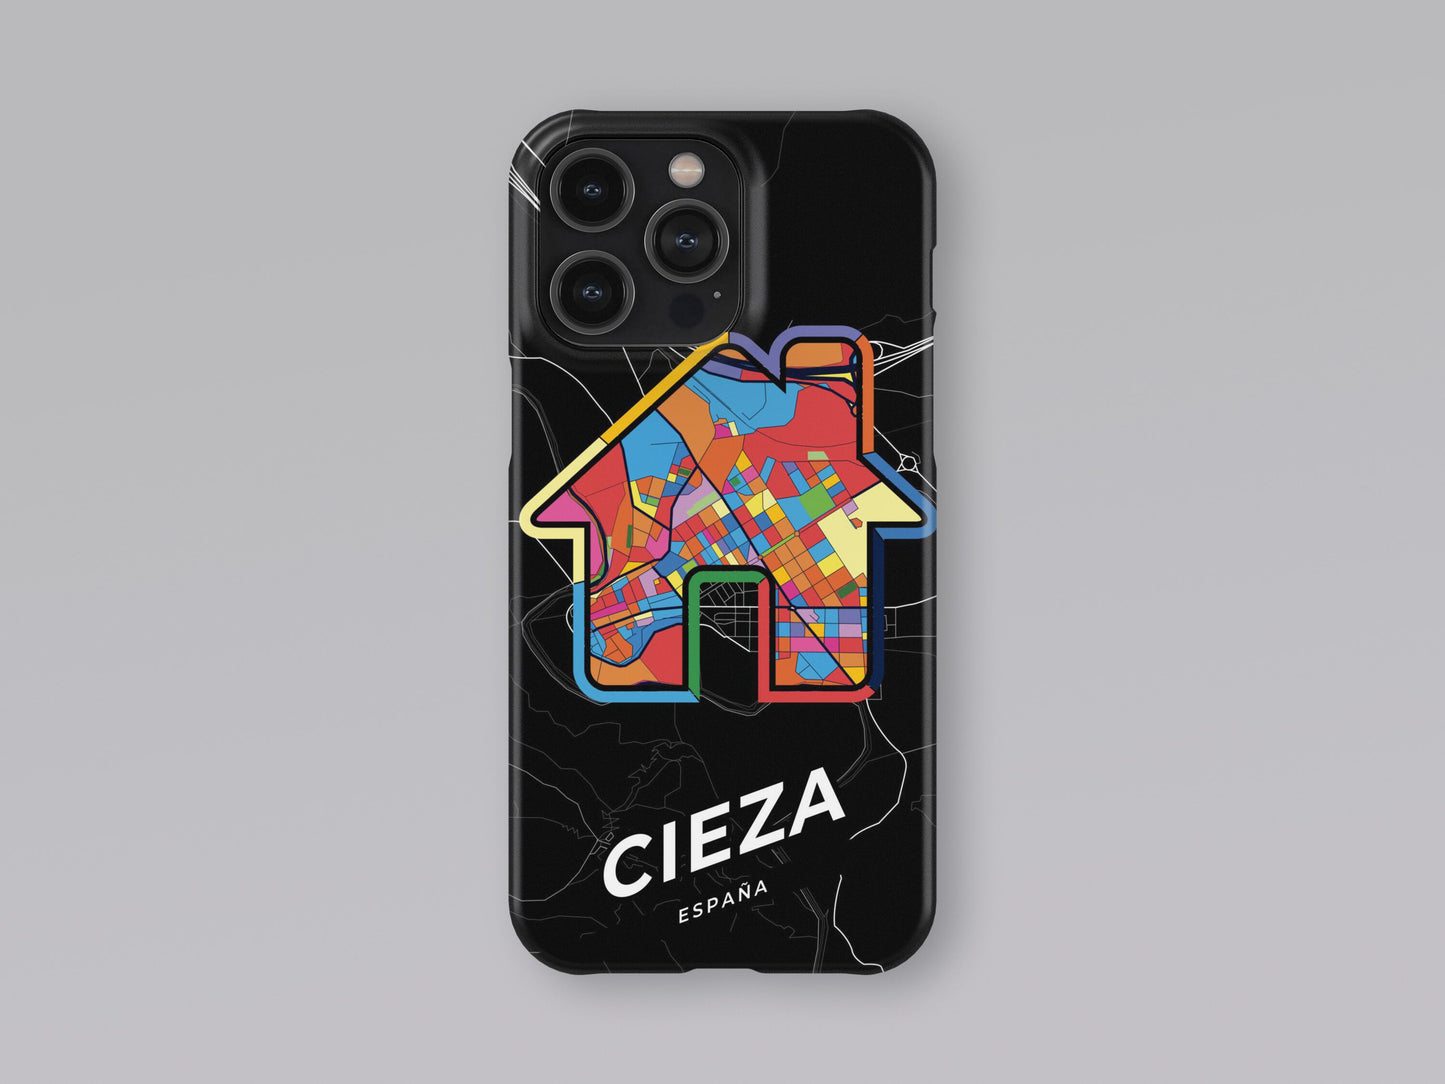 Cieza Spain slim phone case with colorful icon. Birthday, wedding or housewarming gift. Couple match cases. 3